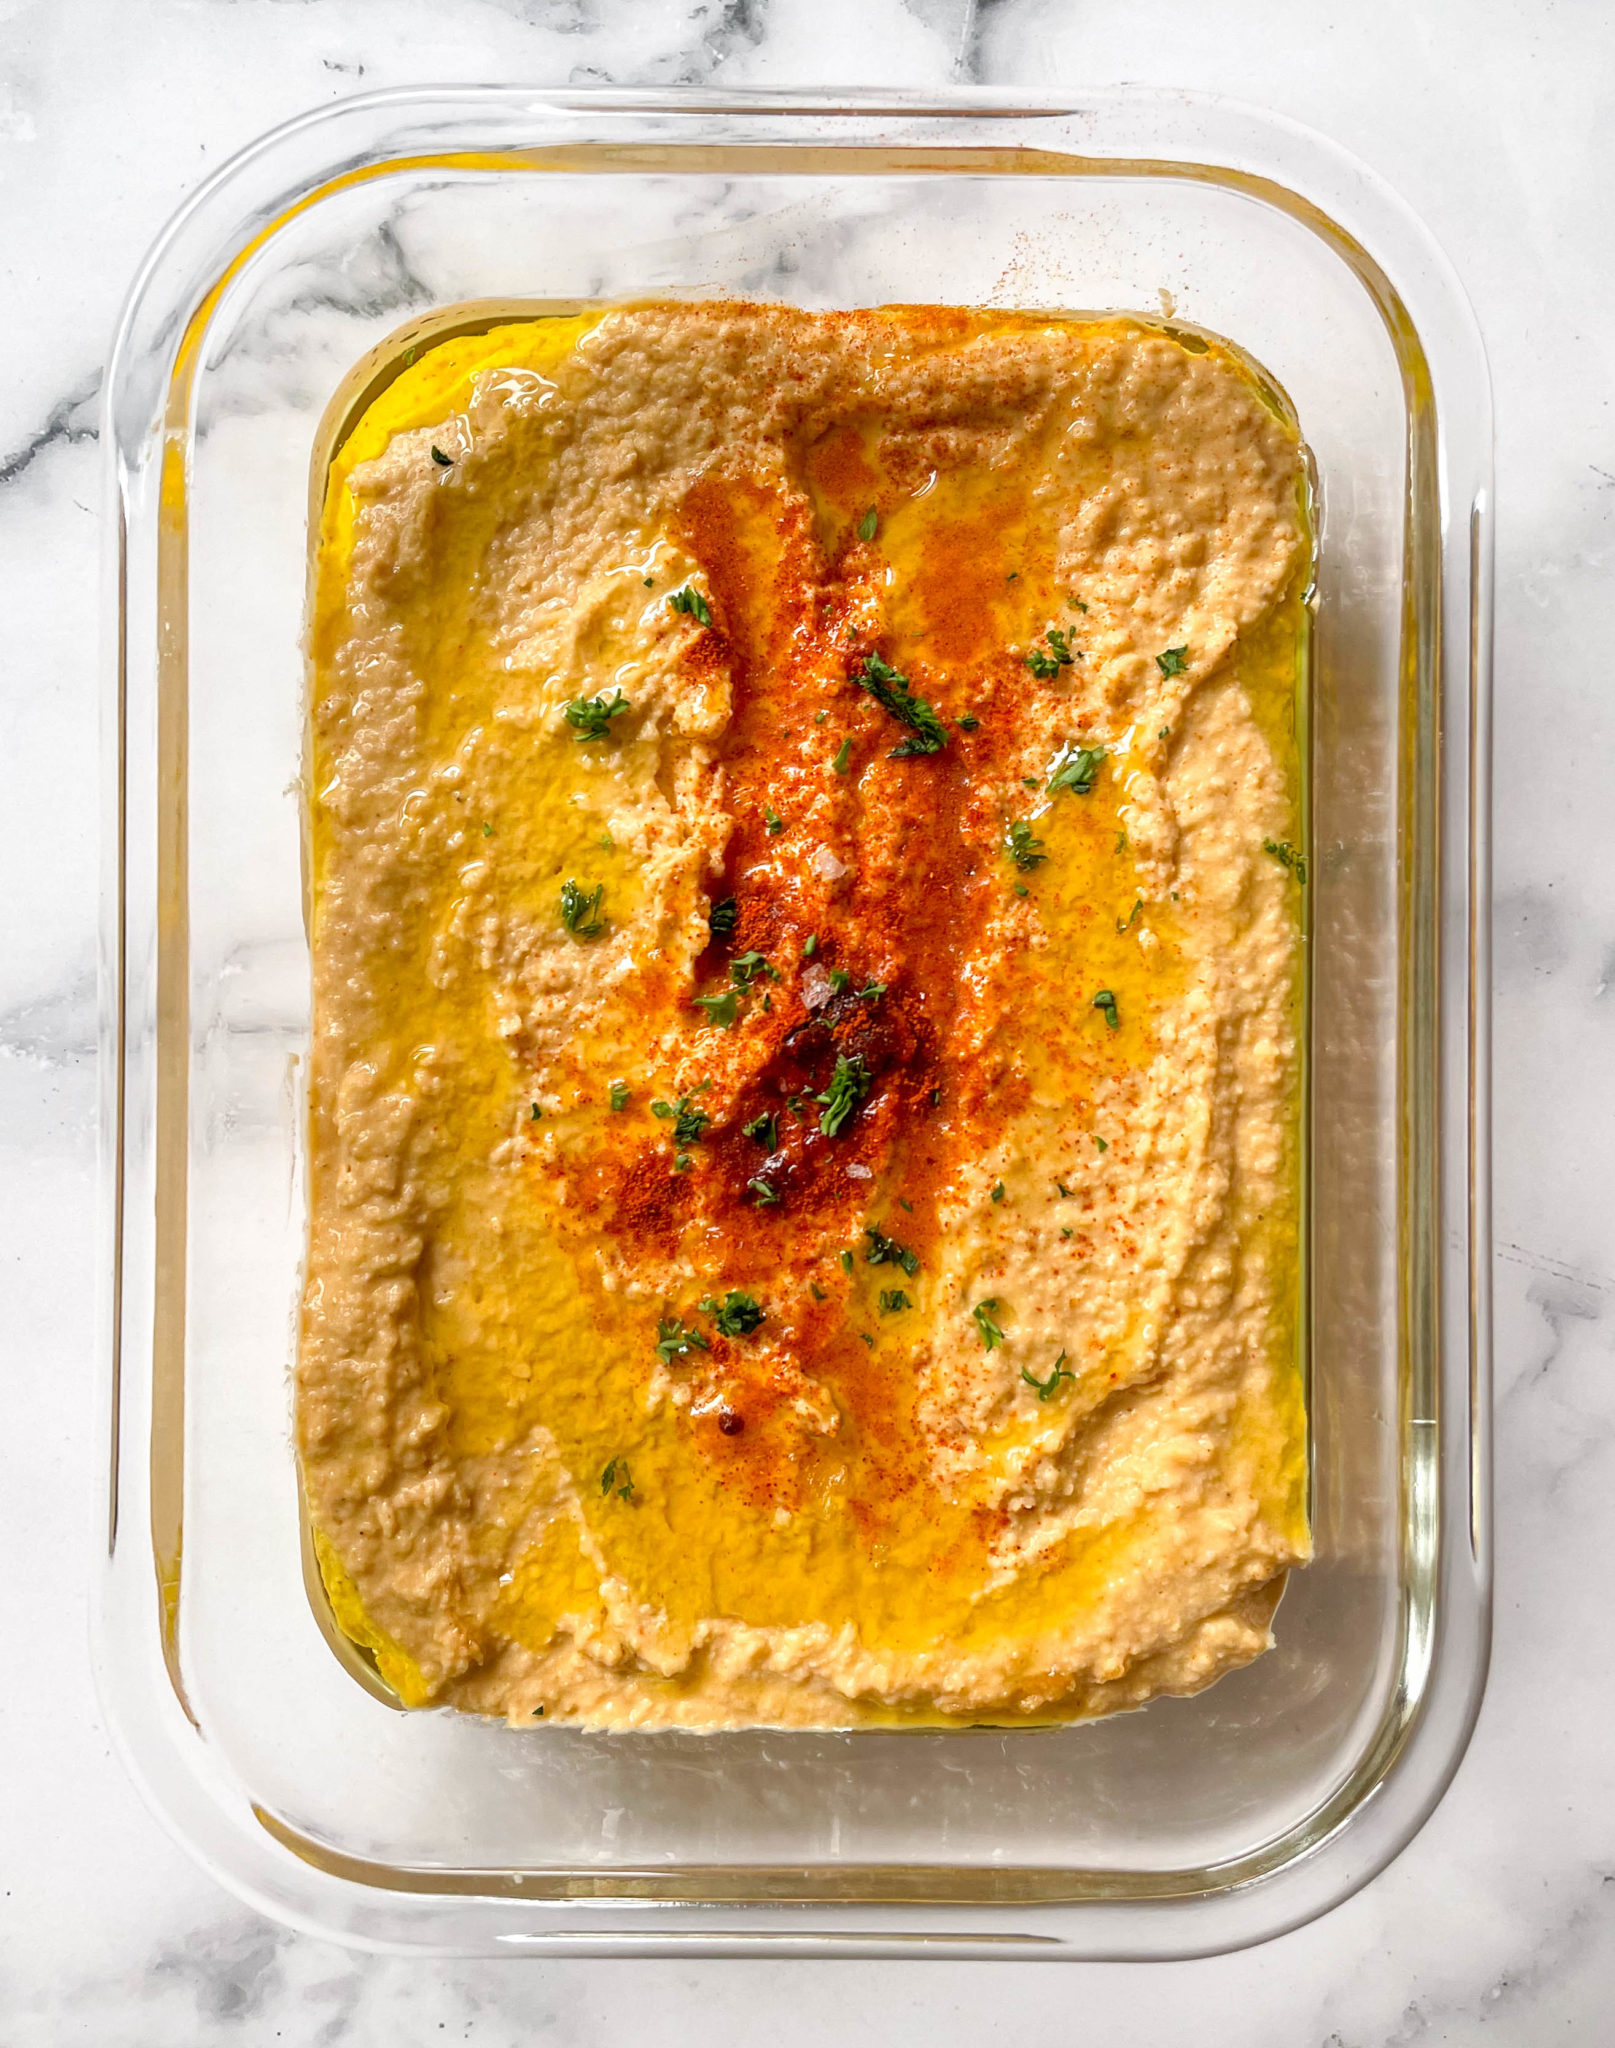 Homemade hummus in a rectangular meal prep container